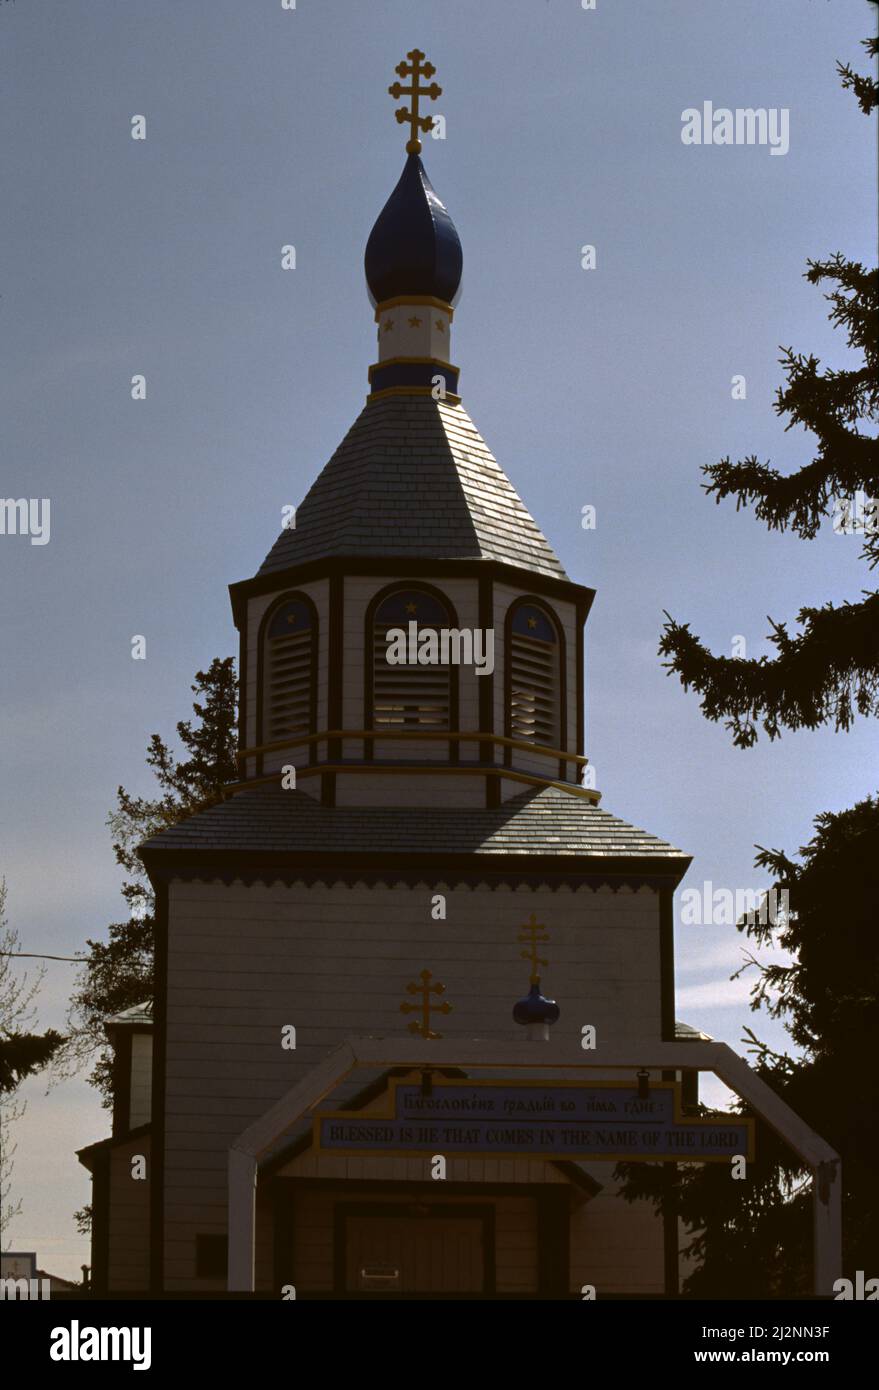 Kenai, AK. U.S.A. 6/1997. Holy Assumption Orthodox Church; also known as Church of the Assumption of the Virgin Mary, is a Russian Orthodox. Completed in 1896, it is the oldest-standing Russian Orthodox church in Alaska; a National Historic Landmark in 1970 and was added to the National Register of Historic Places shortly after. Stock Photo